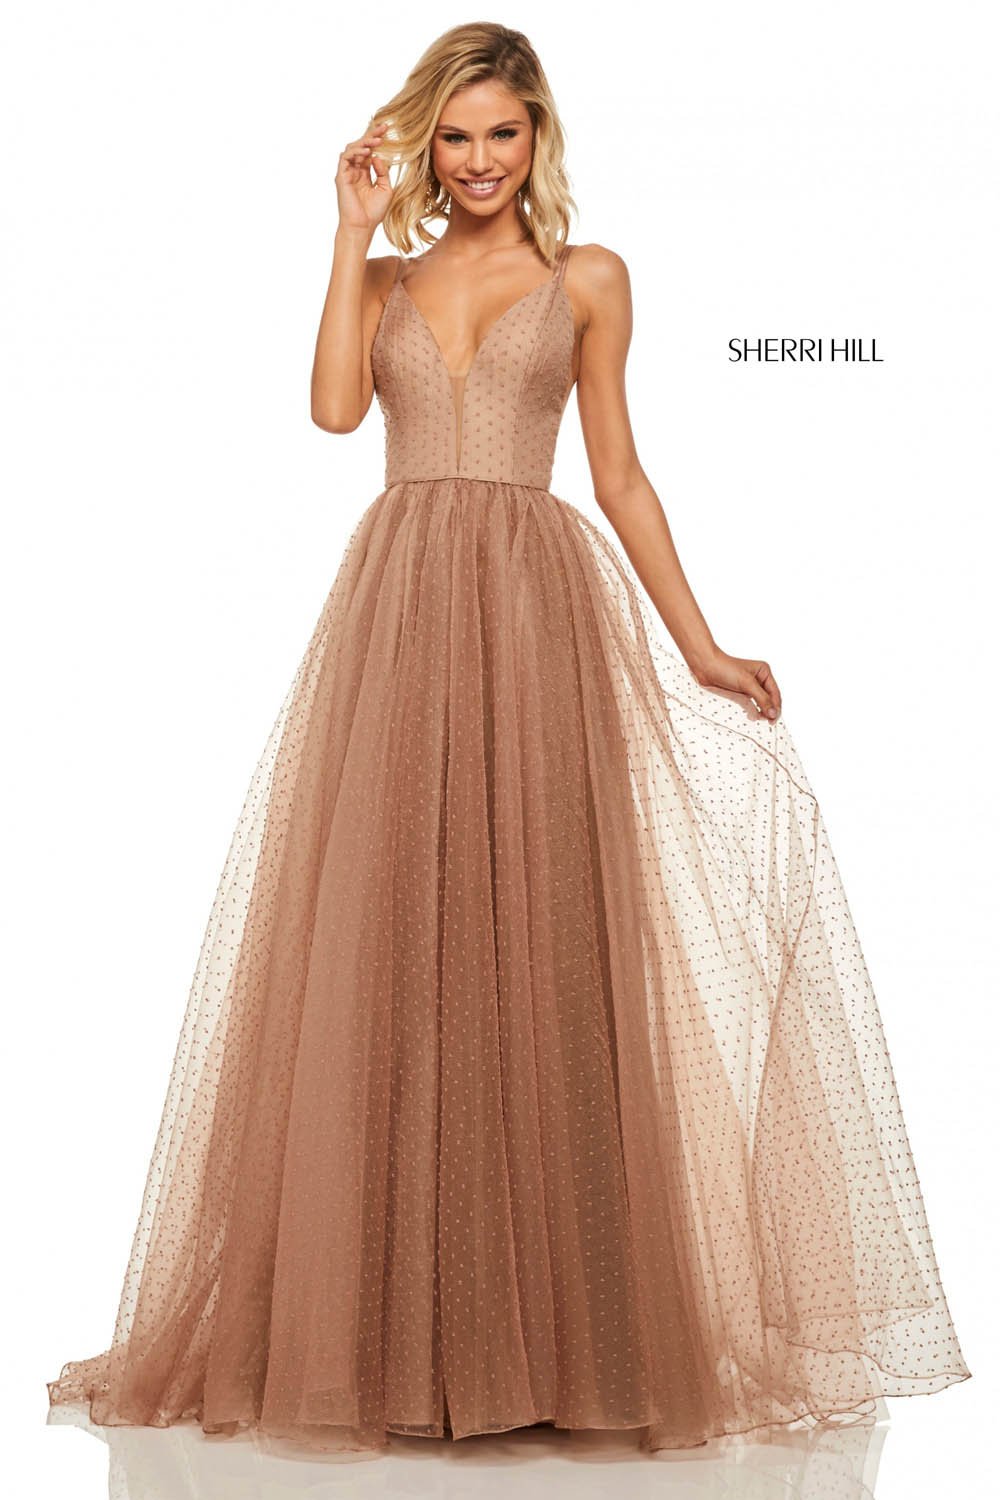 Sherri Hill 52812 dress images in these colors: Light Blue, Dark Nude, Lilac, Coral, Blush, Navy.